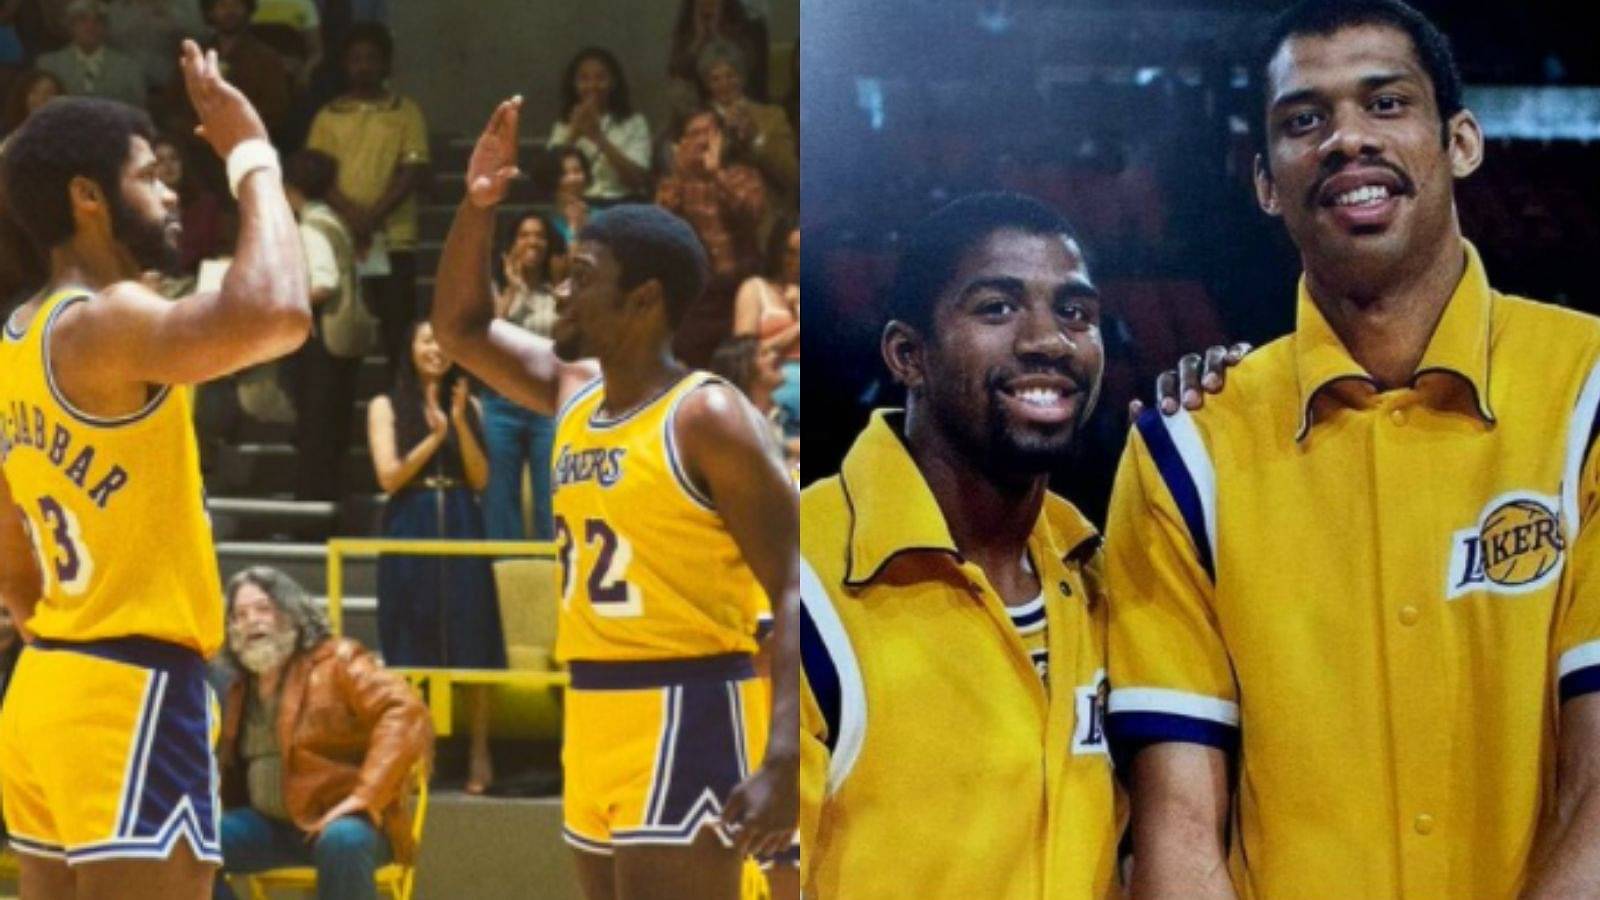 “Watched half the first episode, 'Winning Time' is ridiculous! I don’t want to talk about it!!”: Kareem Abdul-Jabbar and Magic Johnson's distaste for the HBO documentary might lead to its failure